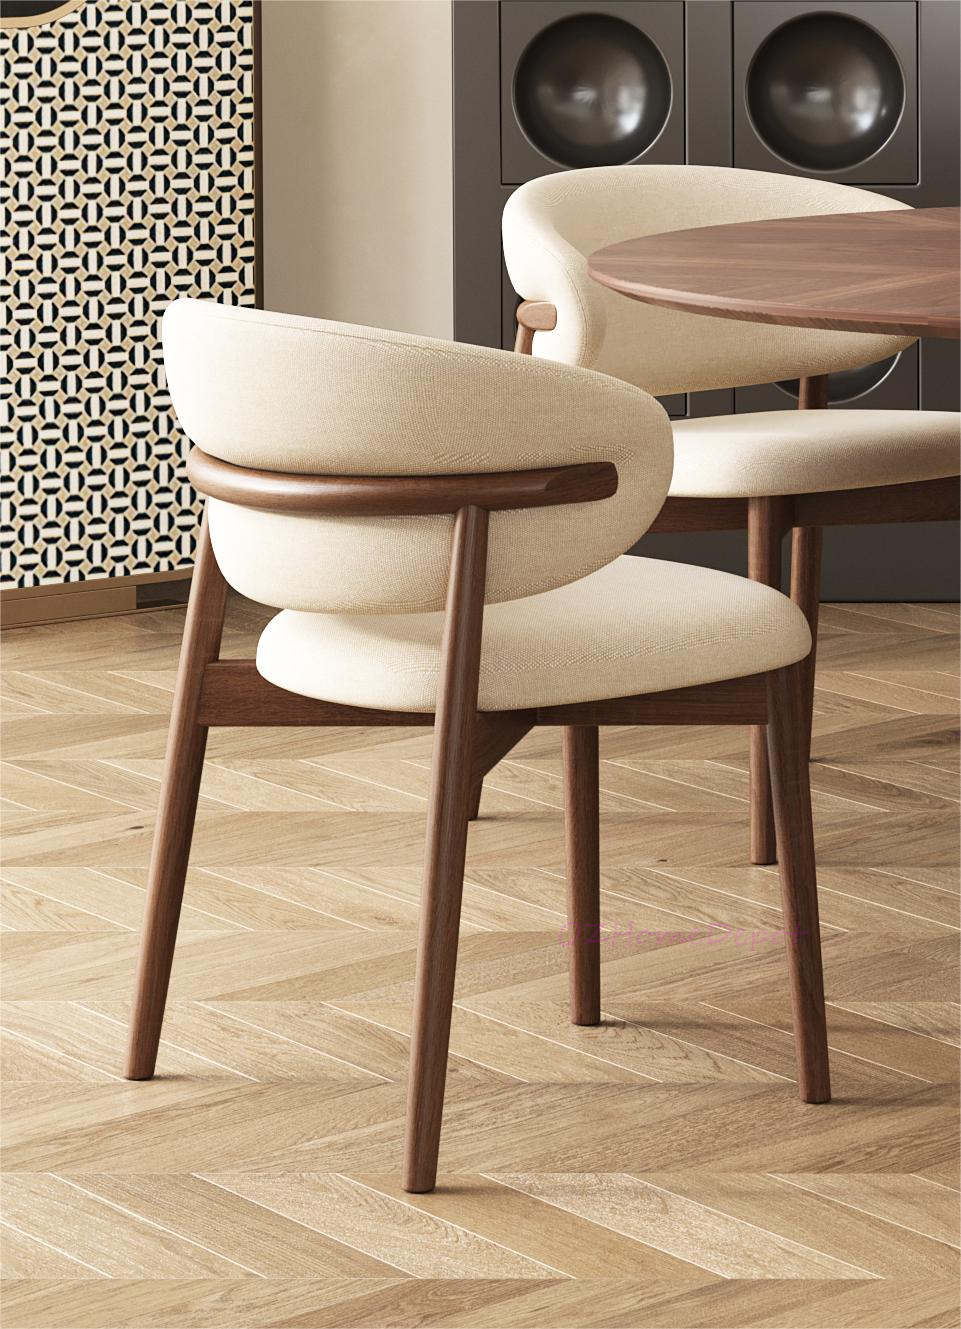 Mars Simple Style Dining Chair Solid Timber Frame And Legs With Fabric Seat Beige Color